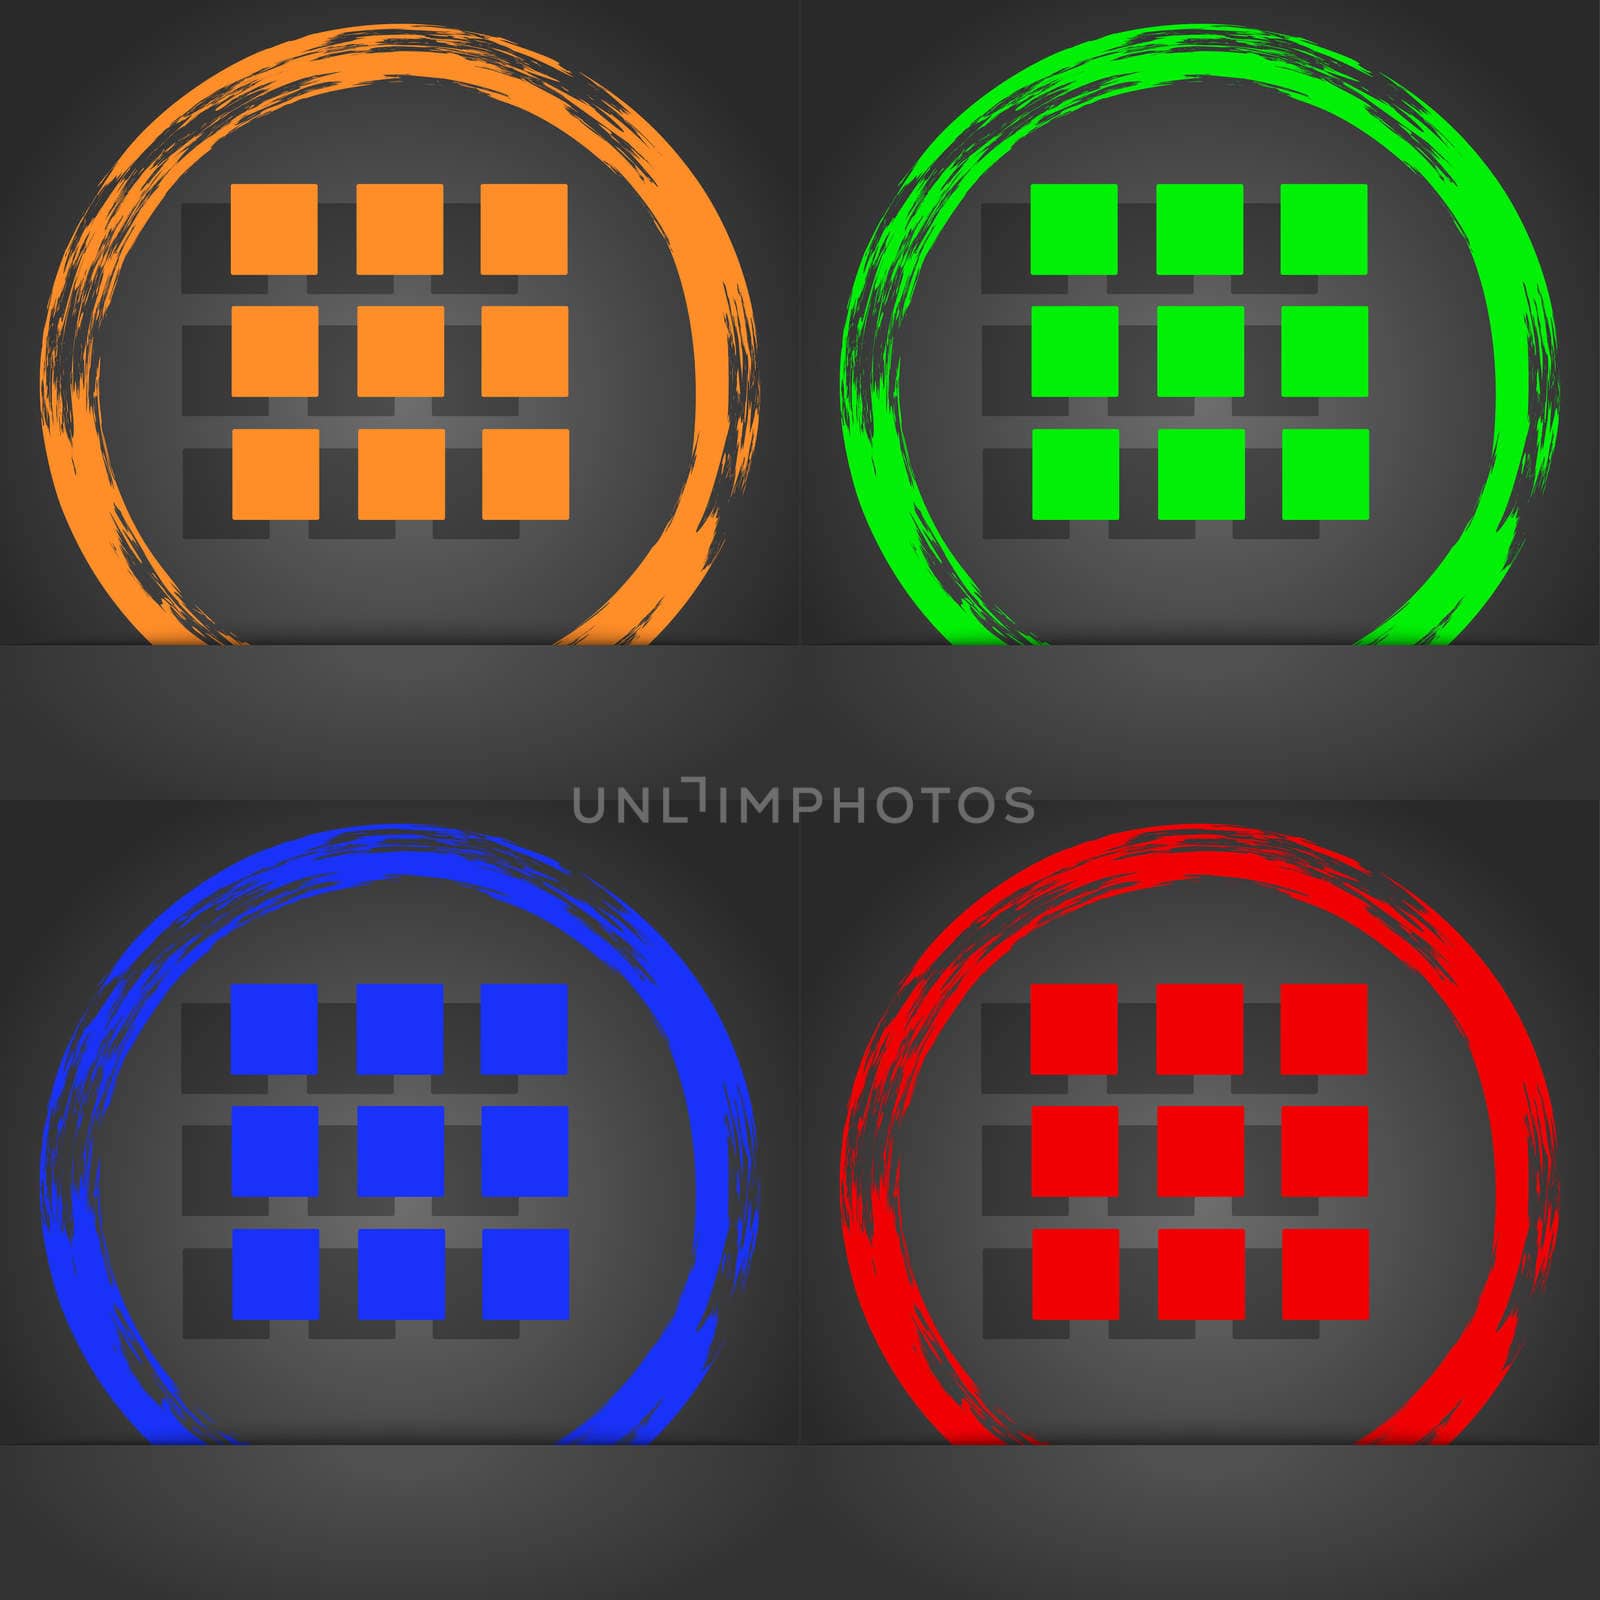 List sign icon. Content view option symbol. Fashionable modern style. In the orange, green, blue, red design. illustration